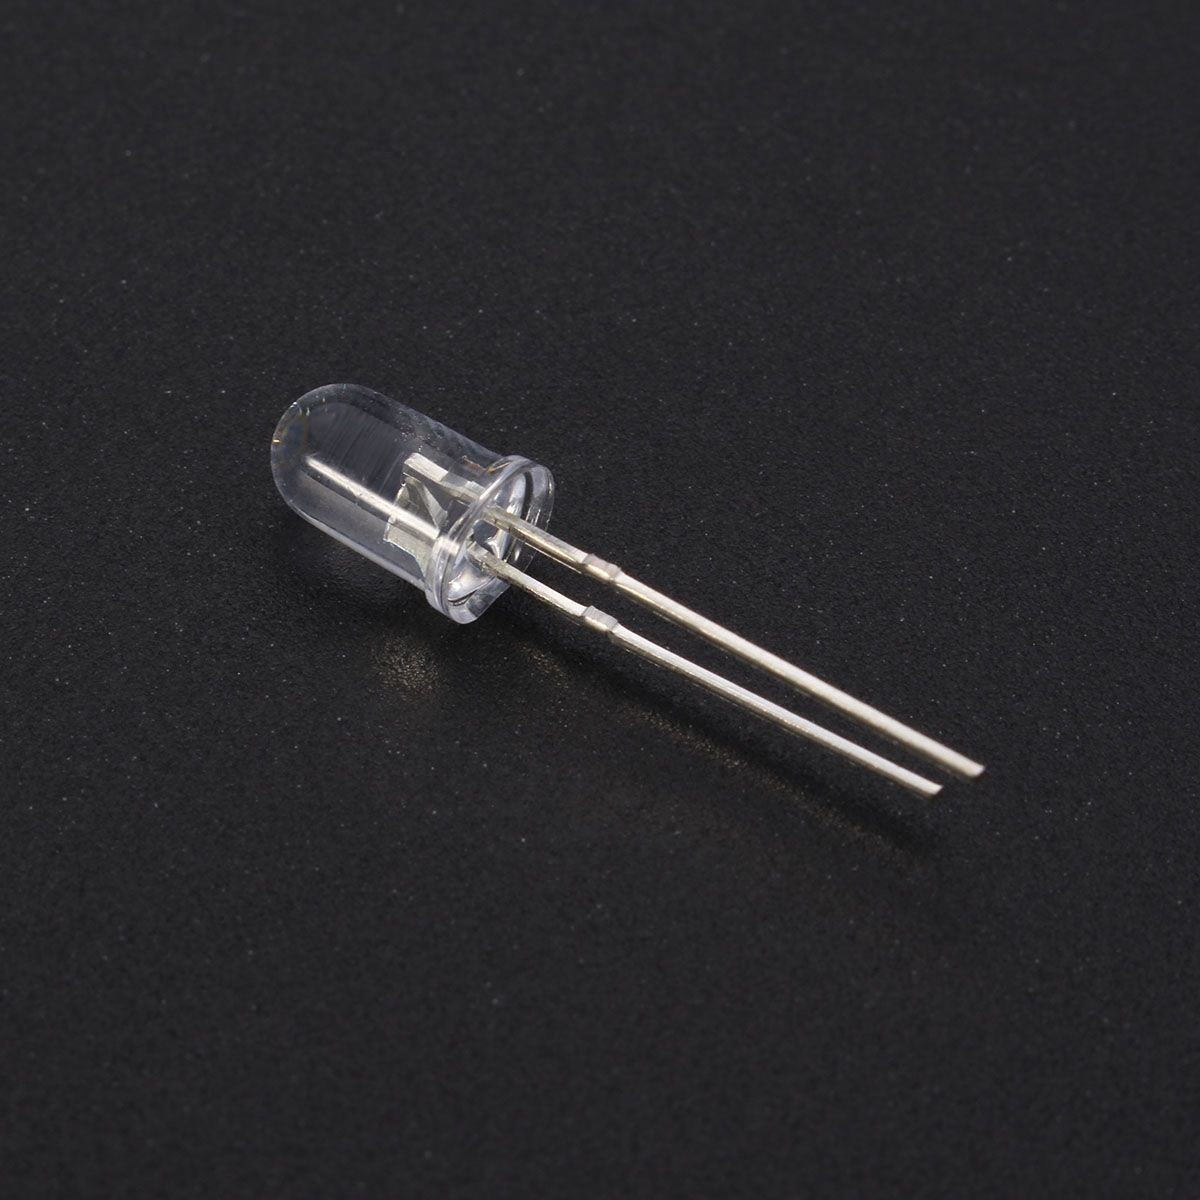 5mm-Round-2-pin-LED-Light-Wide-Angle-Bright-Bi-pin-DIY-Diode-Bulb-Lamp-5-Colors-84971